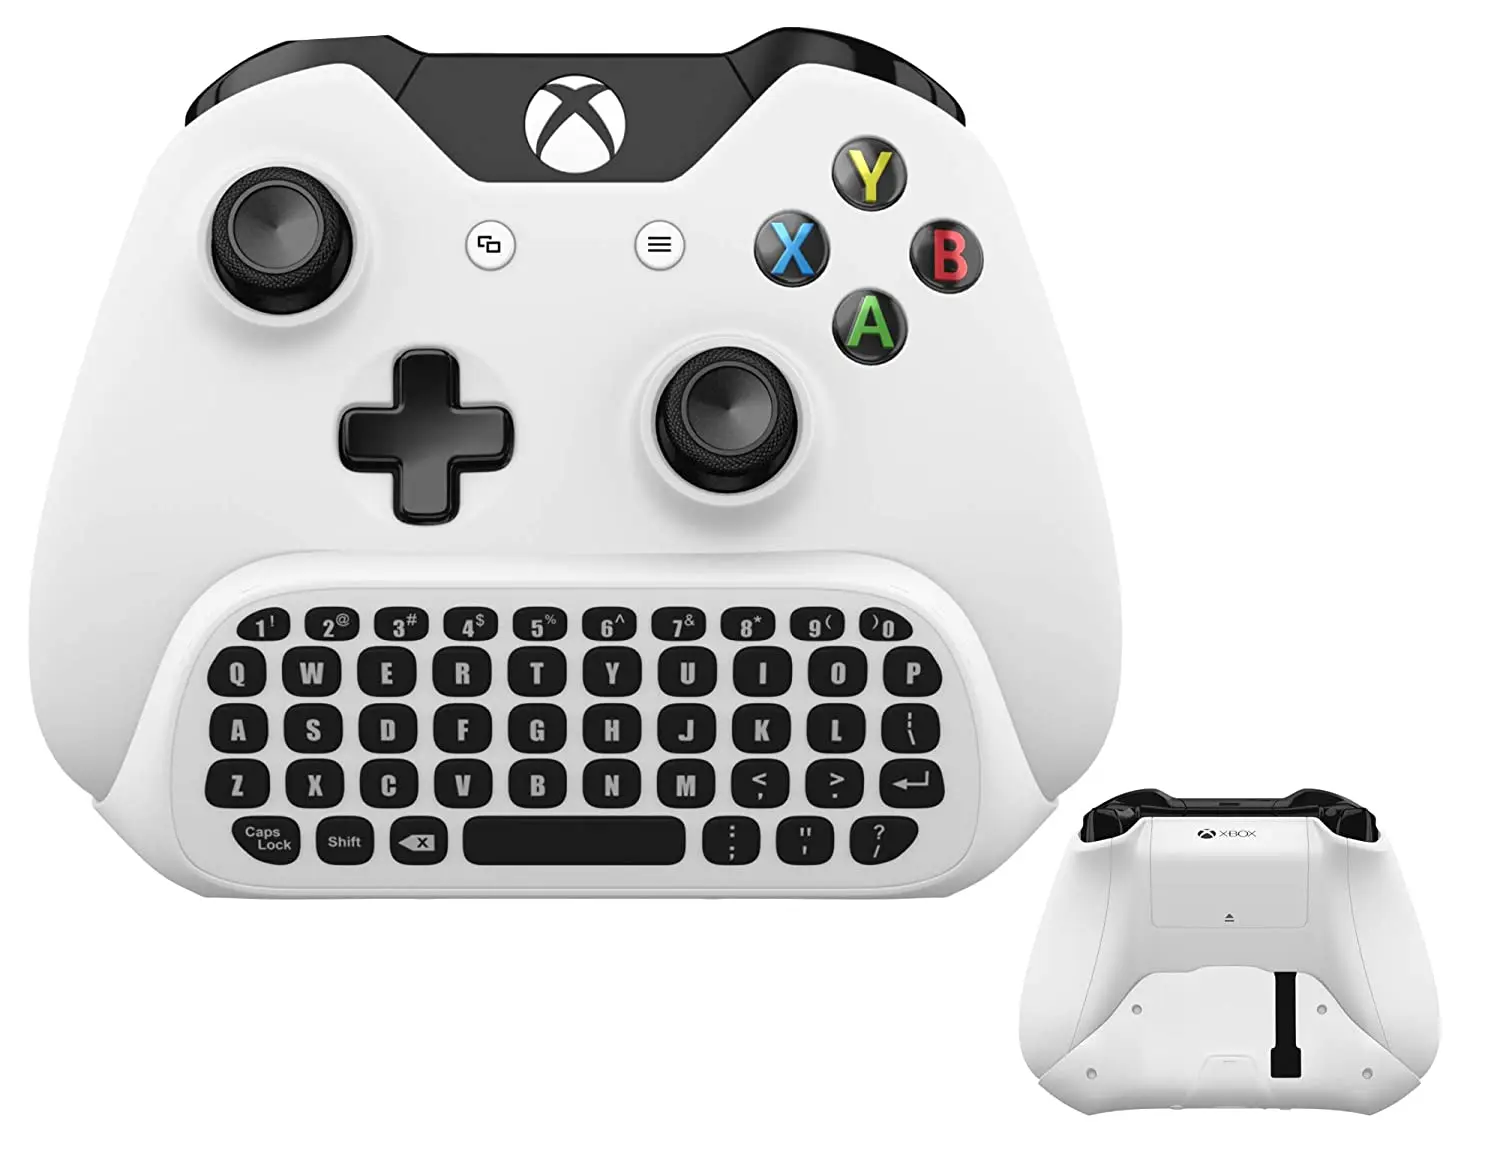 Wireless Keyboard ChatPad for Xbox One S Keyboard with USB Receiver with Audio/Headset Jack for Xbox One Elite & Slim Controller